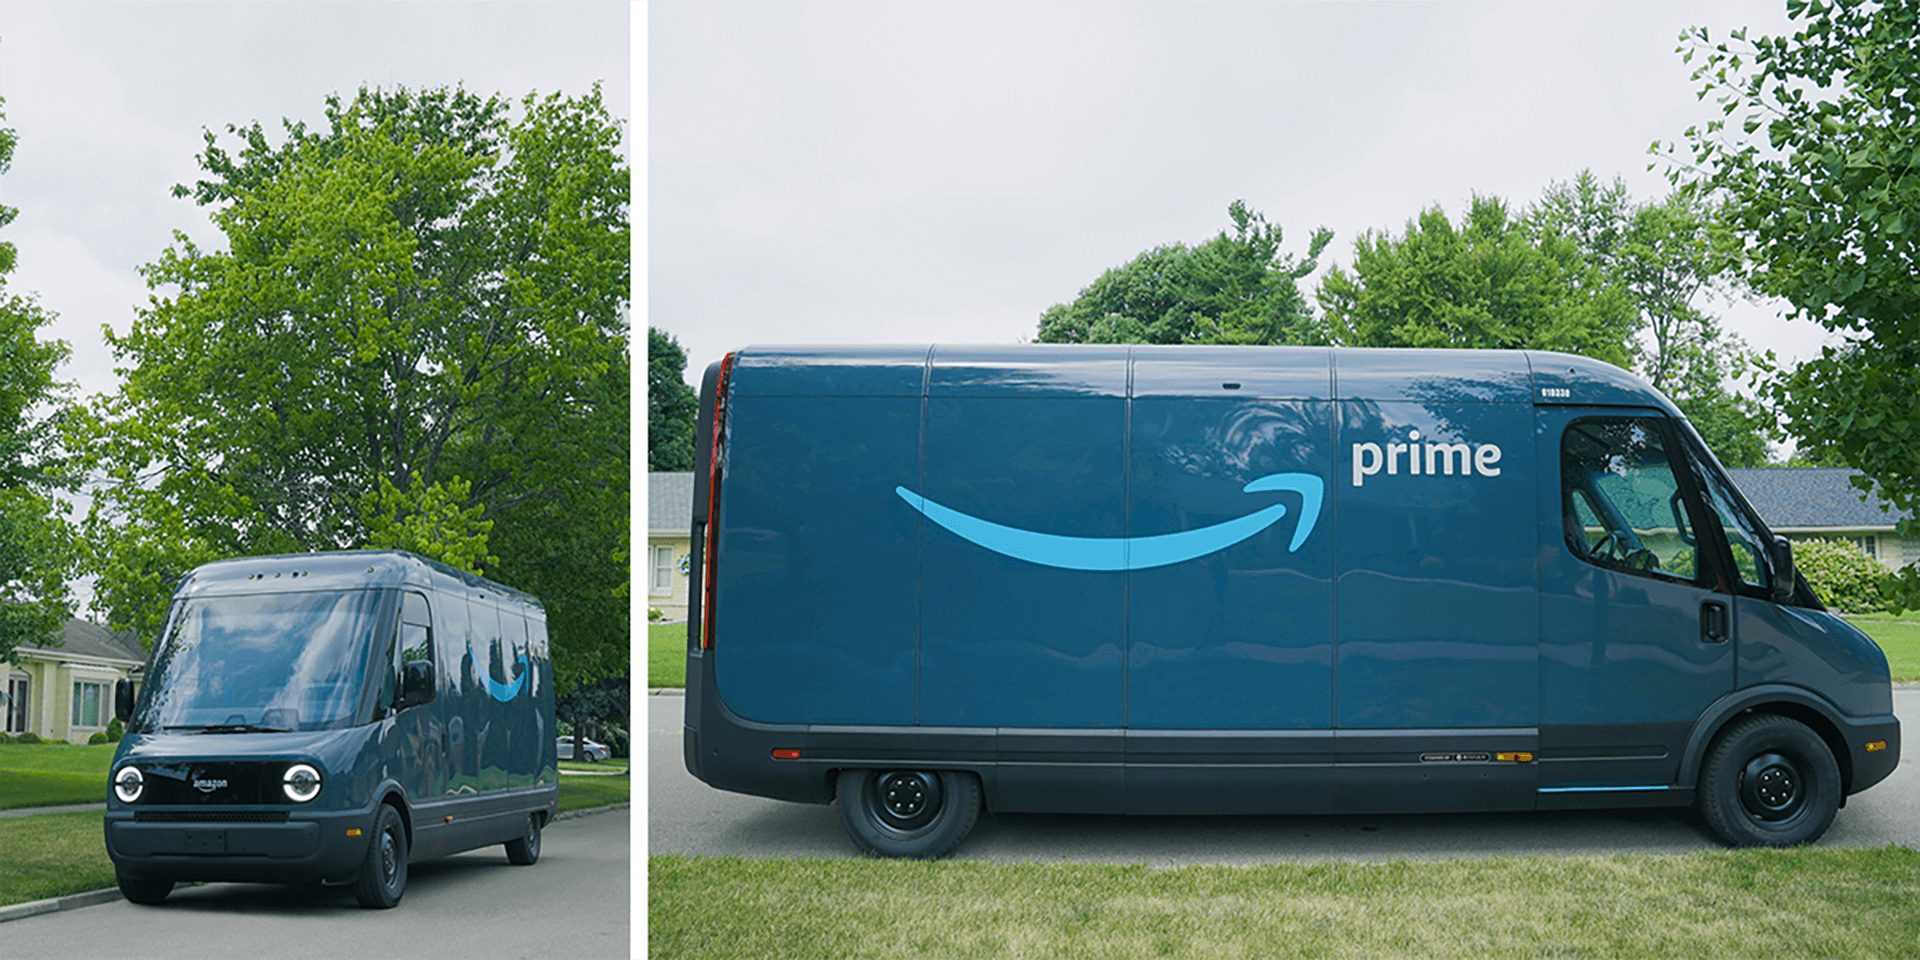 Amazon's new electric Rivian delivery trucks hit the road